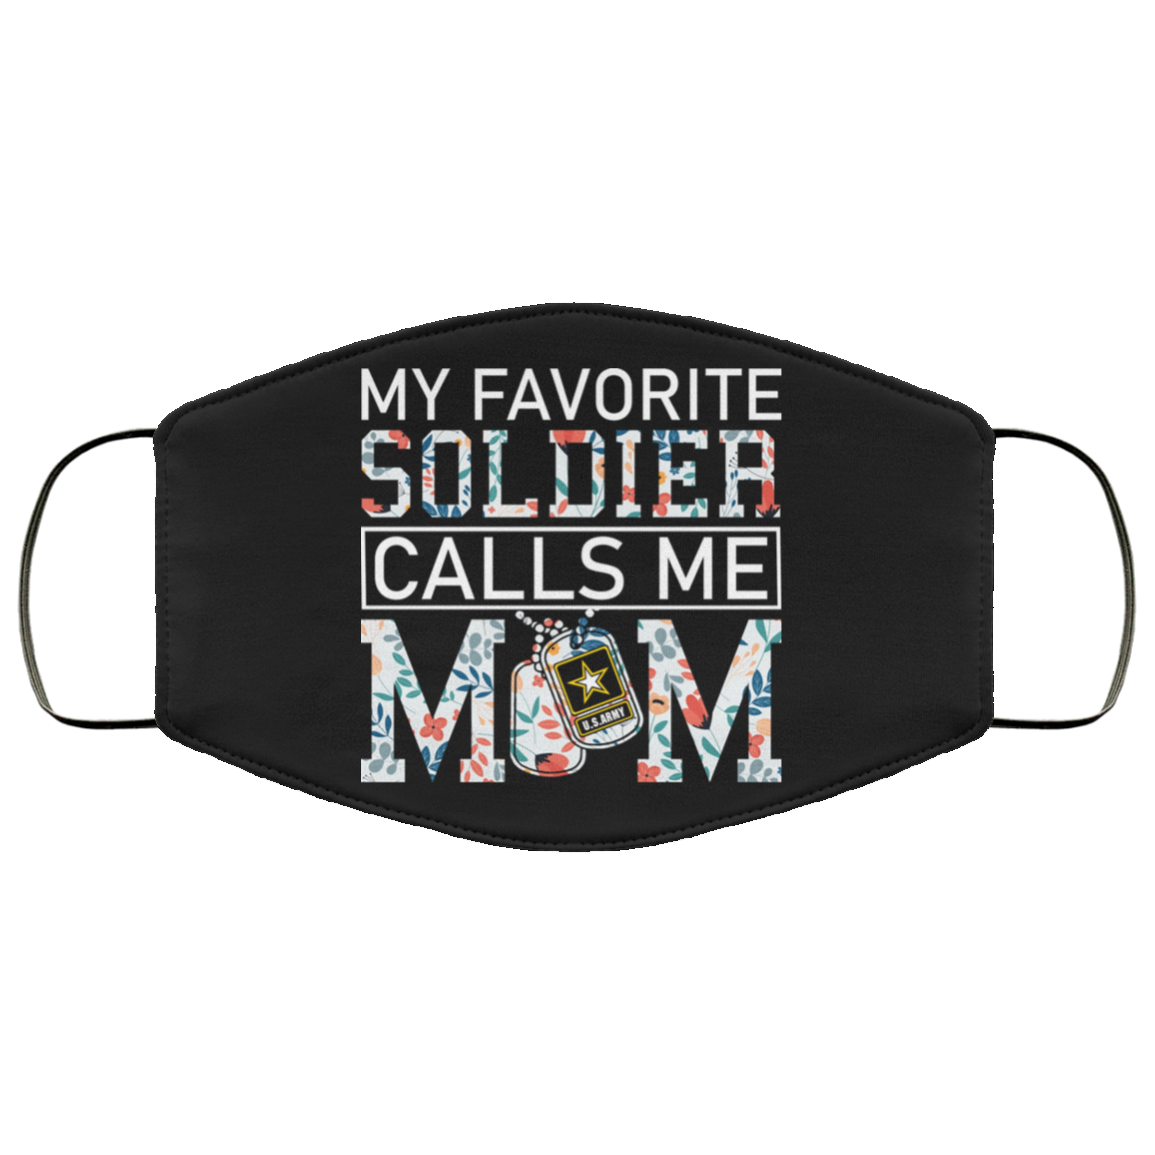 My Favorite Soldier Calls Me Mom Face Mask - floral Army